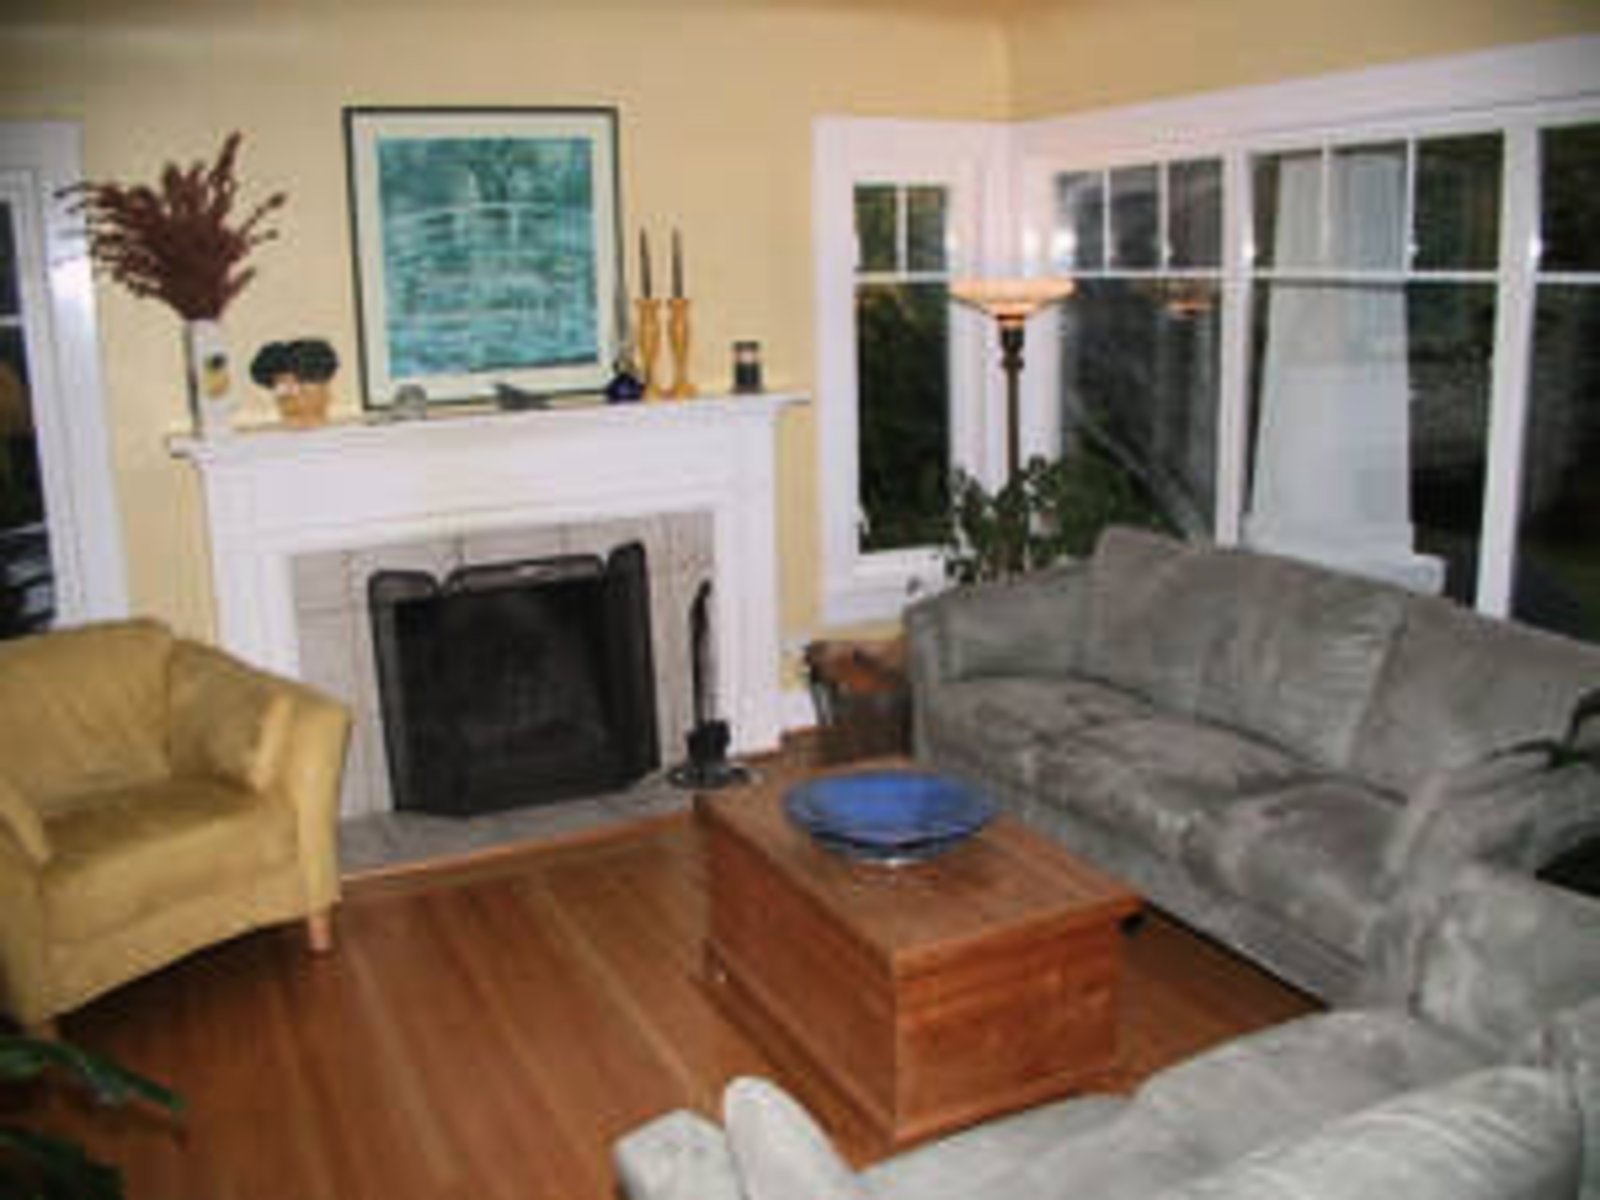 Living Room with hardwood floor and woodburning fireplace